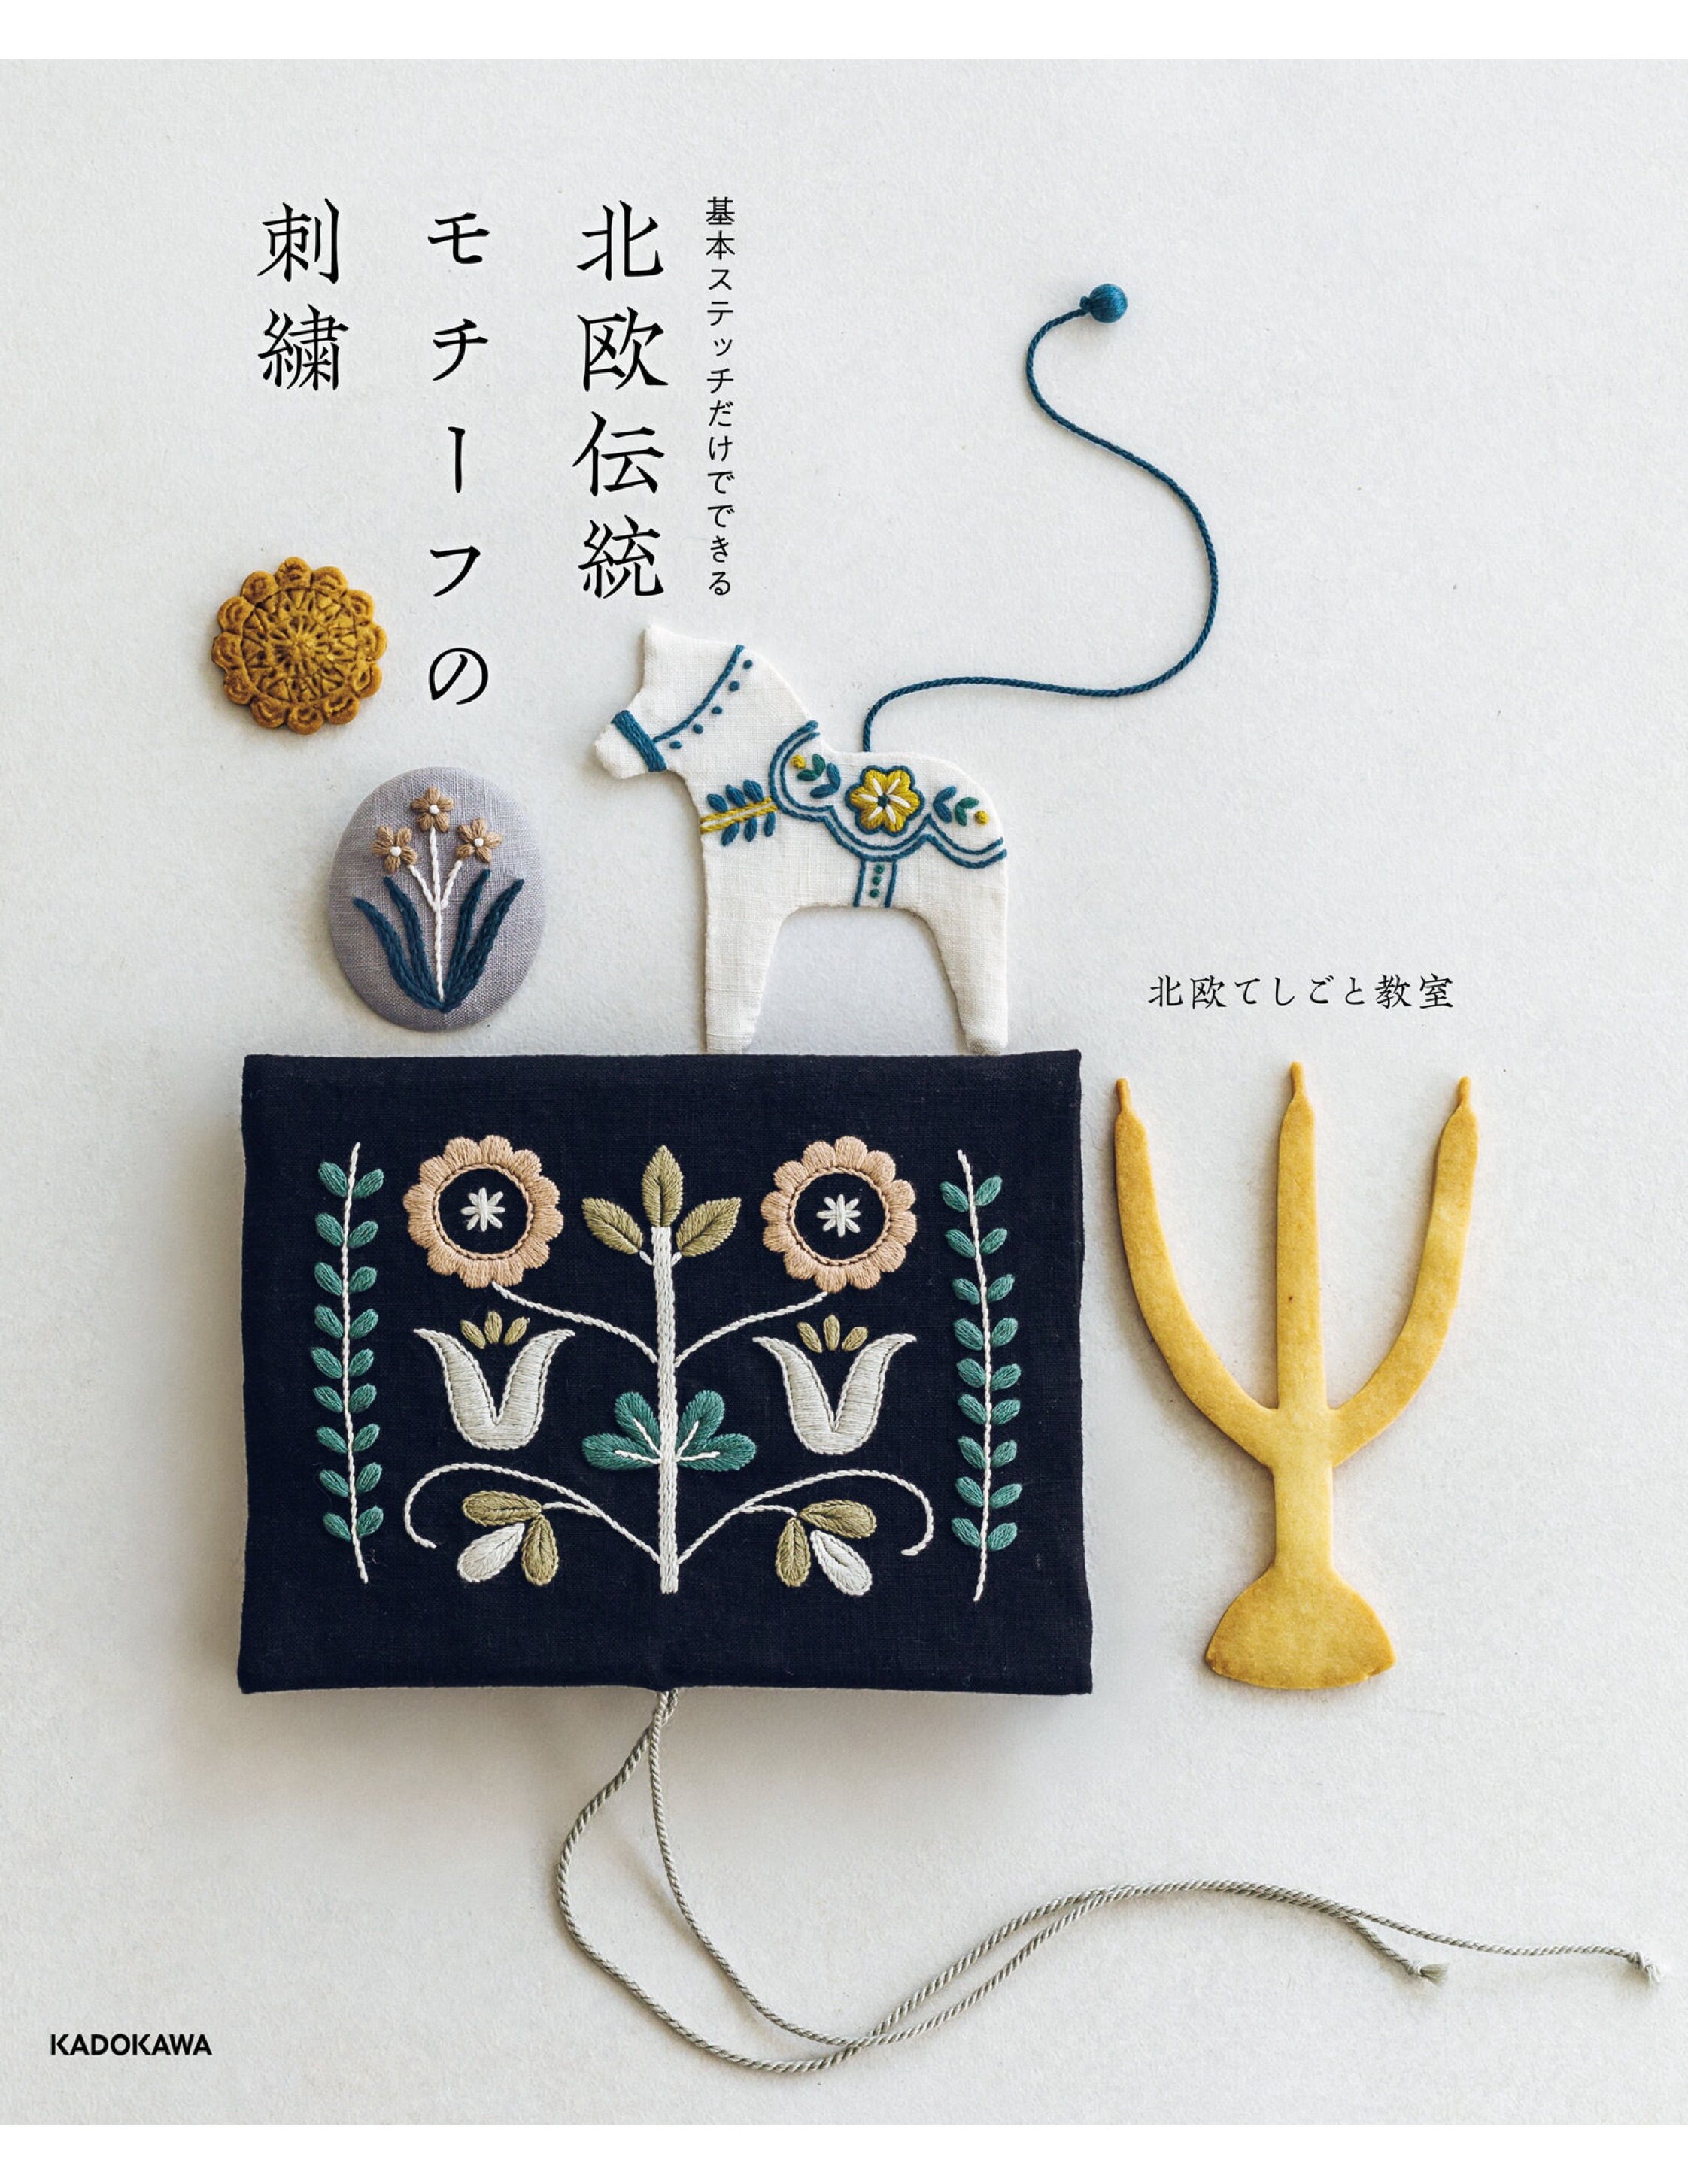 Book: Lovely Little Embroideries Book Embroidery Book Embroidery Patterns  Needlework Patterns Embroidery for Beginners 